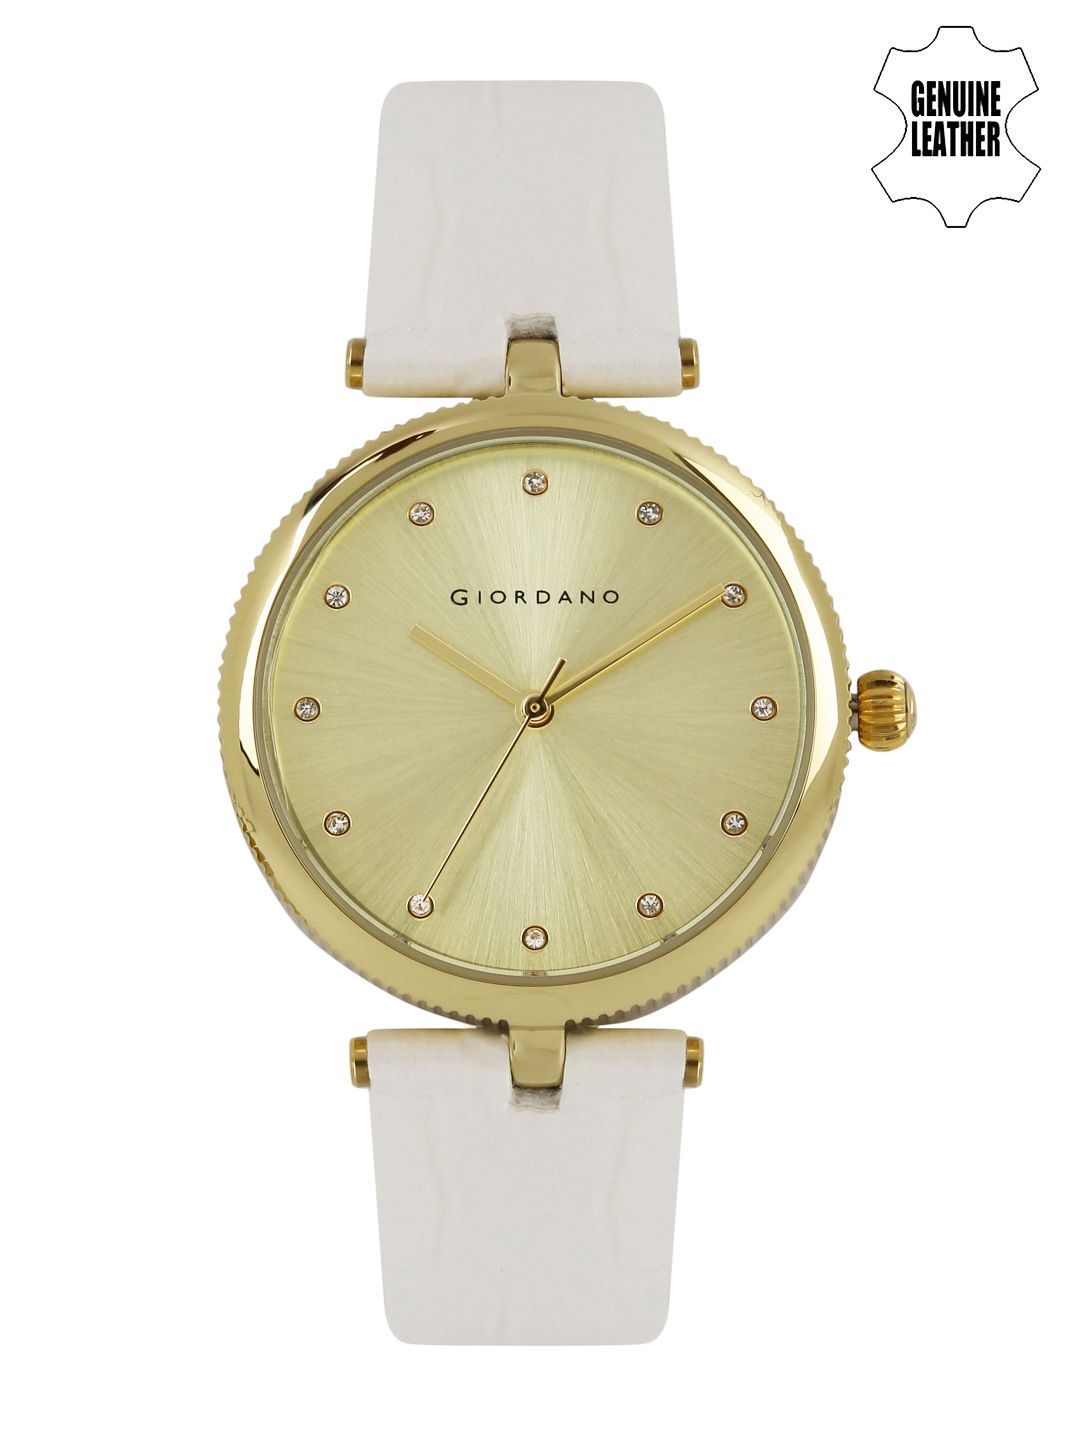 GIORDANO Women Muted Gold-Toned Analogue Watch A2038-05 Price in India